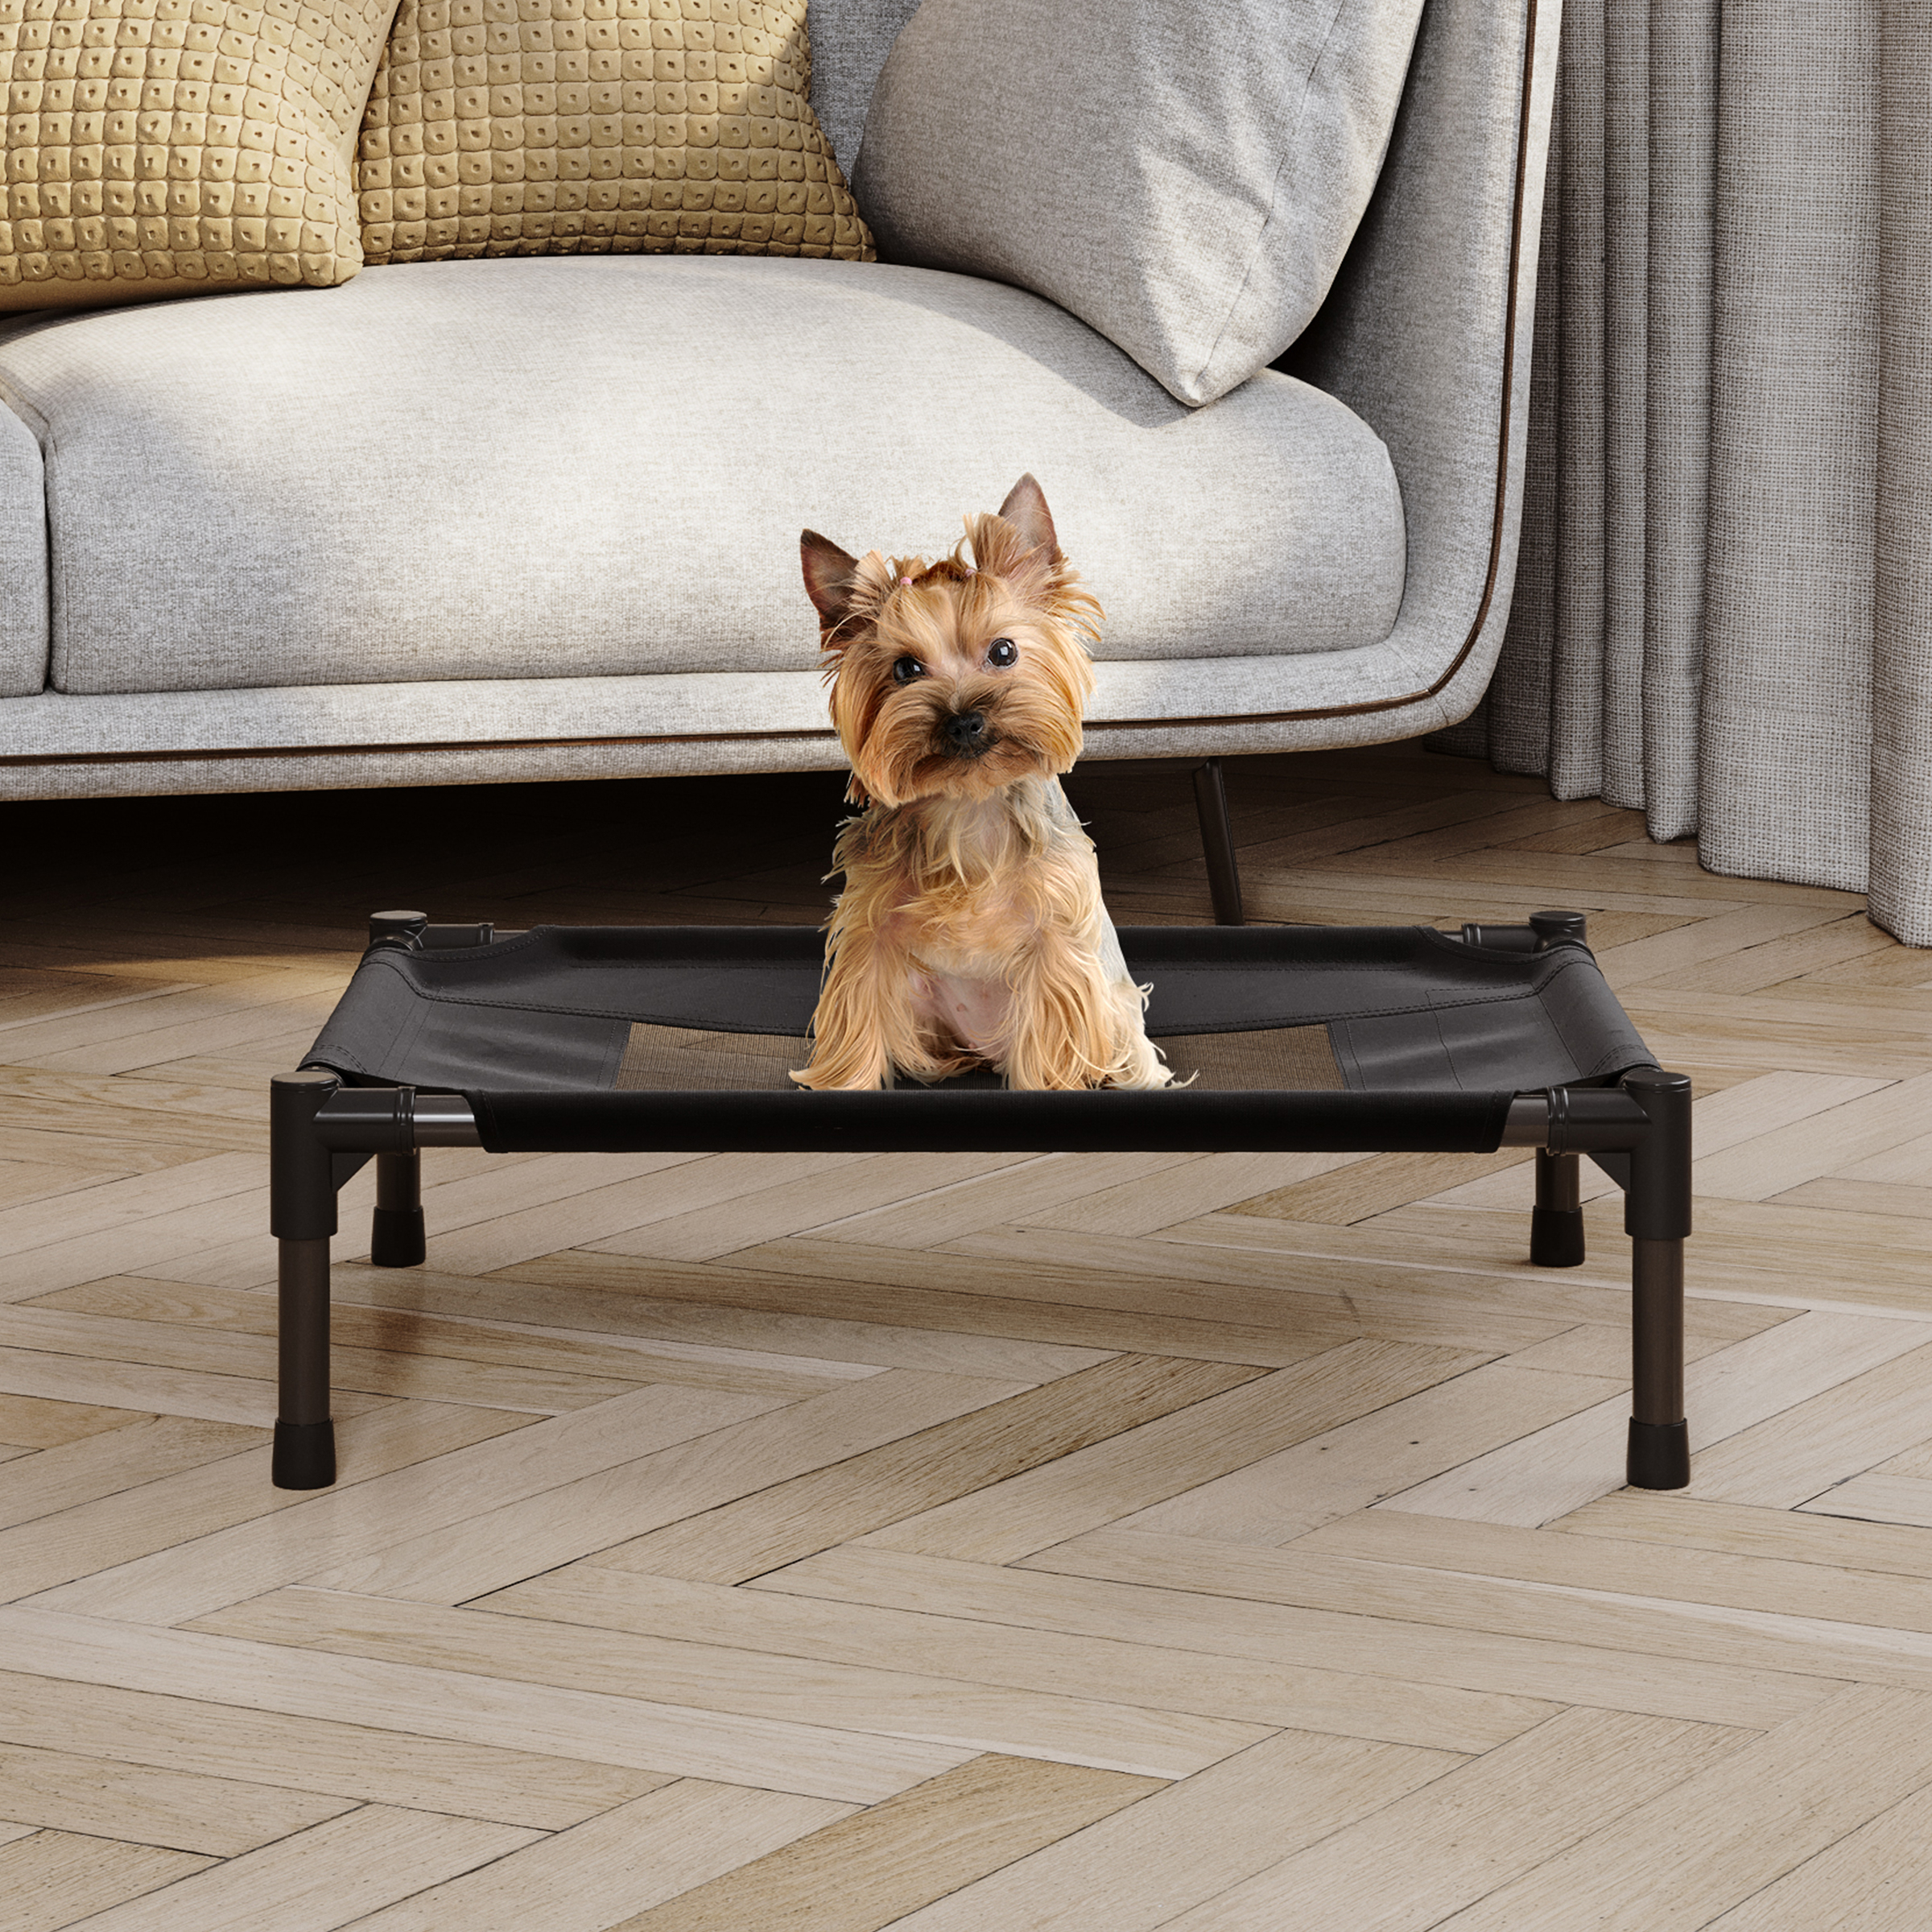 Elevated Dog Bed - 24.5x18.5-Inch Portable Pet Bed With Non-Slip Feet - Indoor/Outdoor Dog Cot Or Puppy Bed For Pets Up To 25lbs By PETMAKER